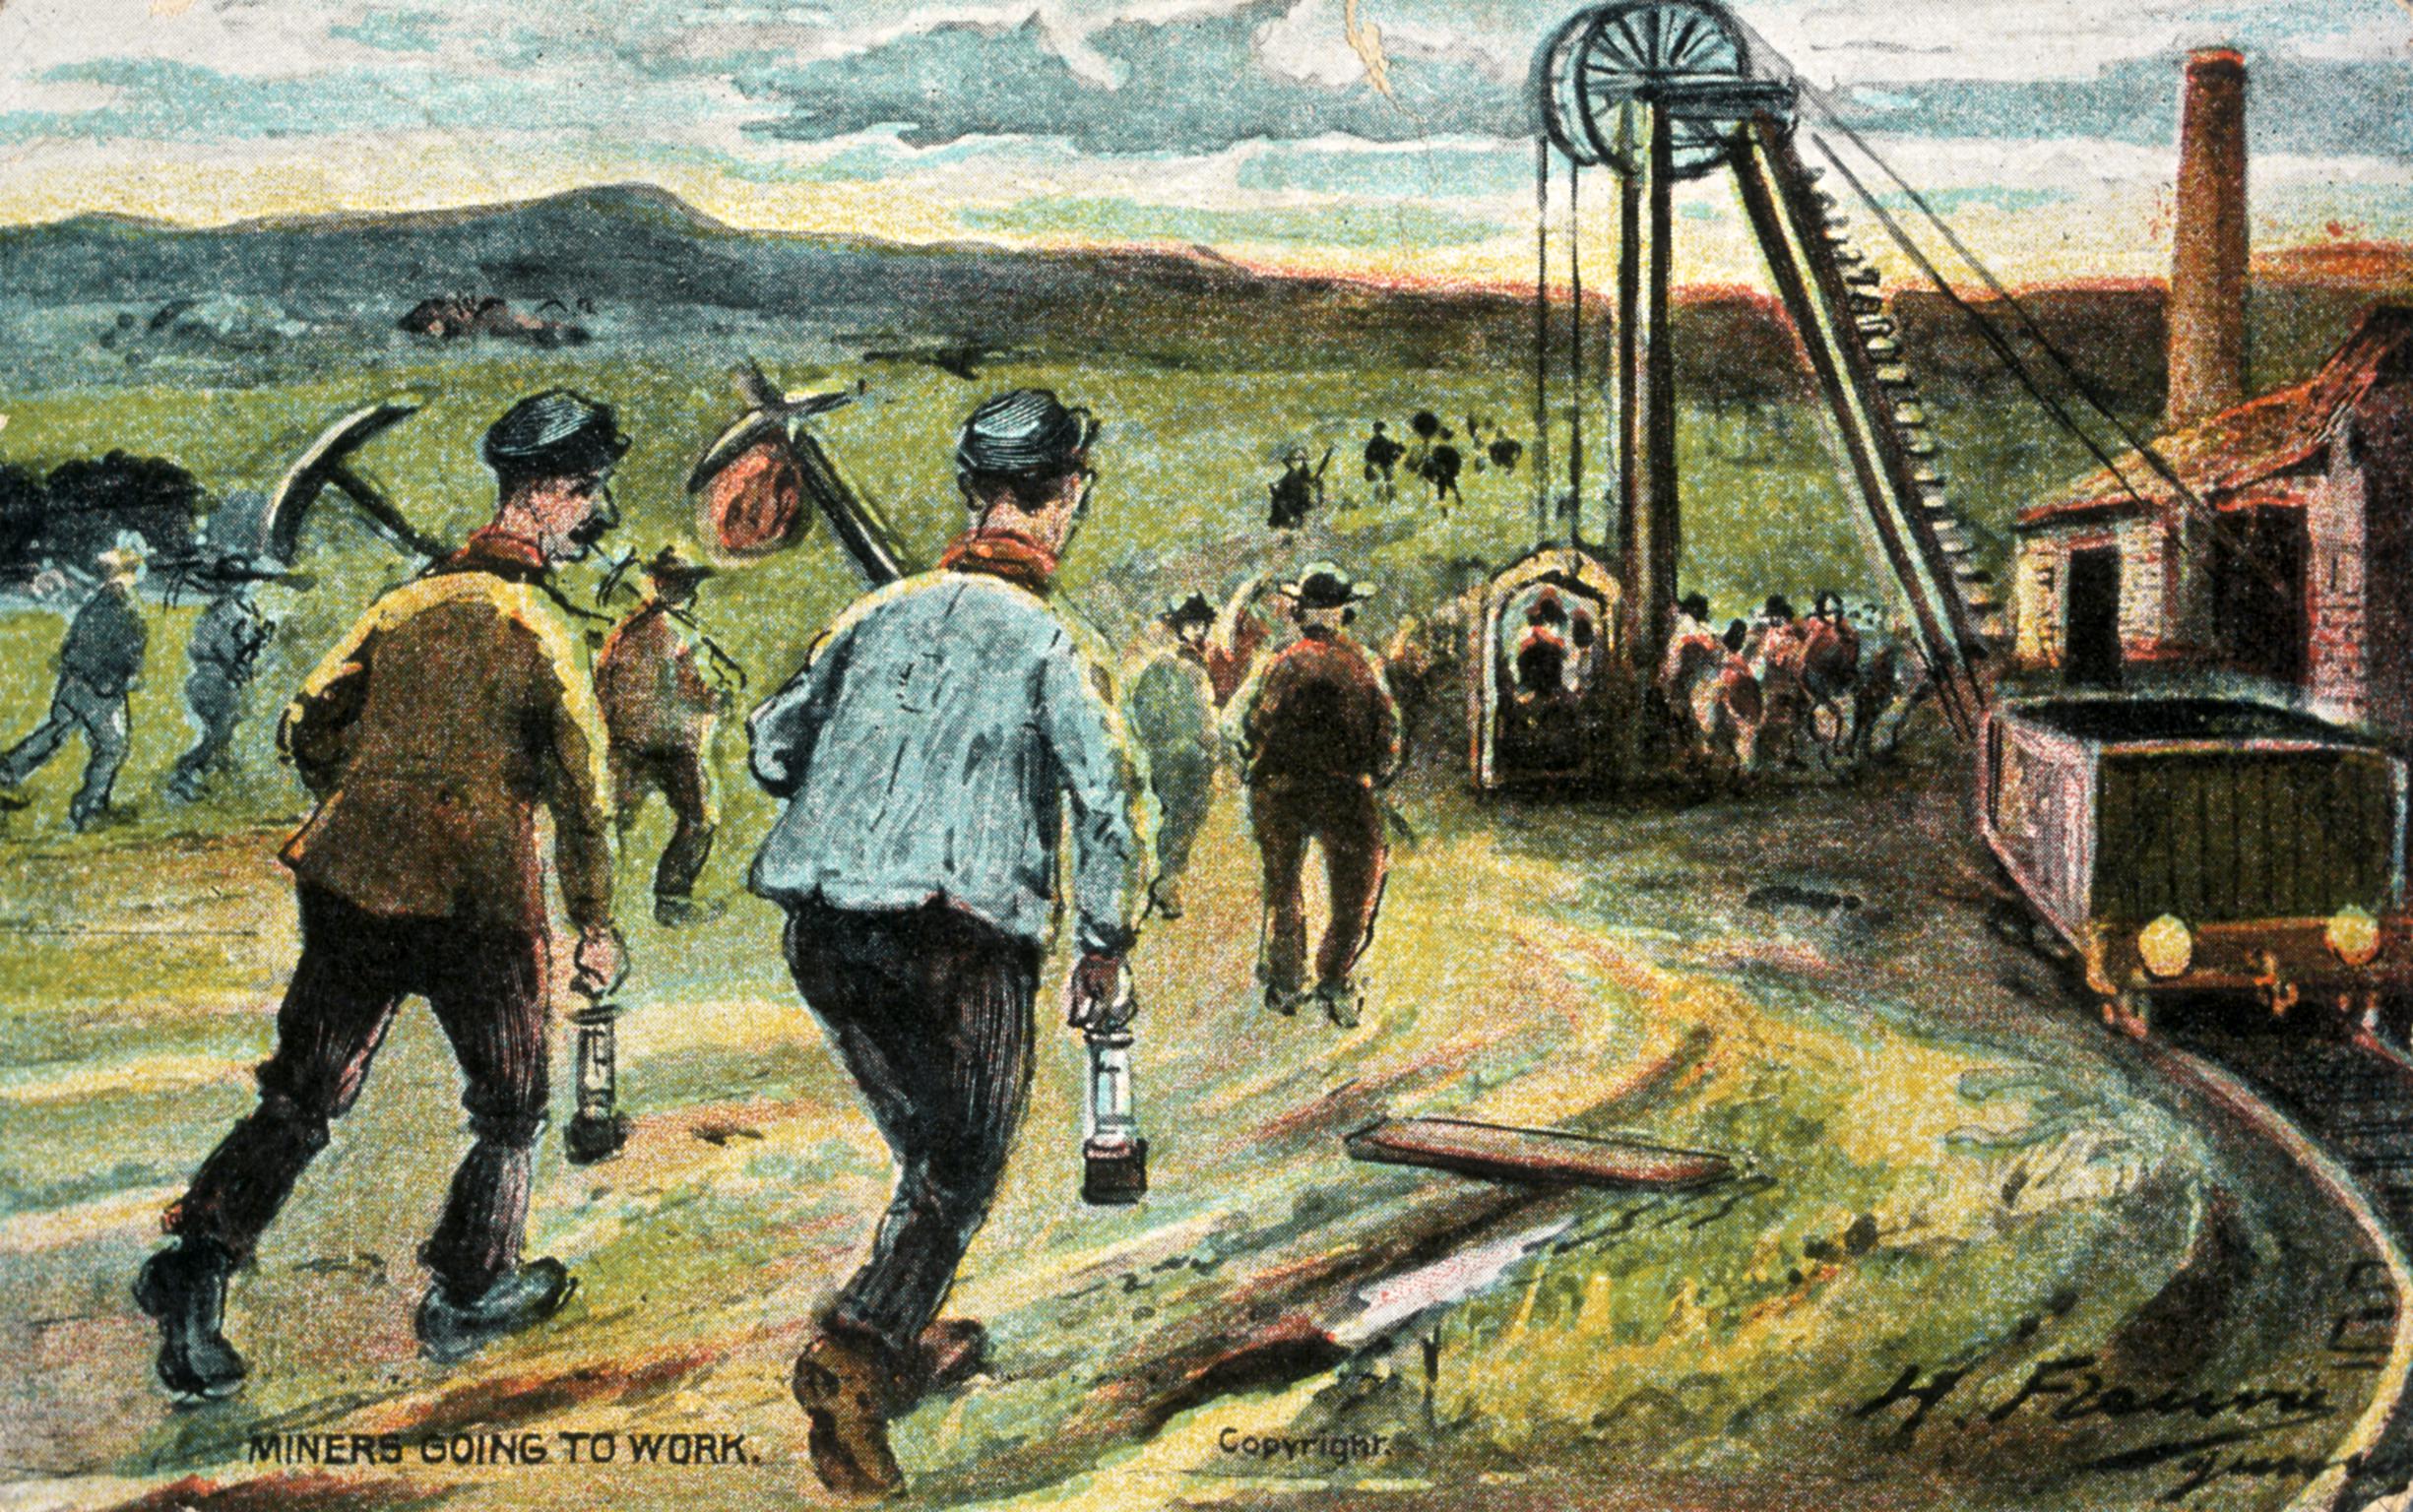 Miners going to work (postcard)